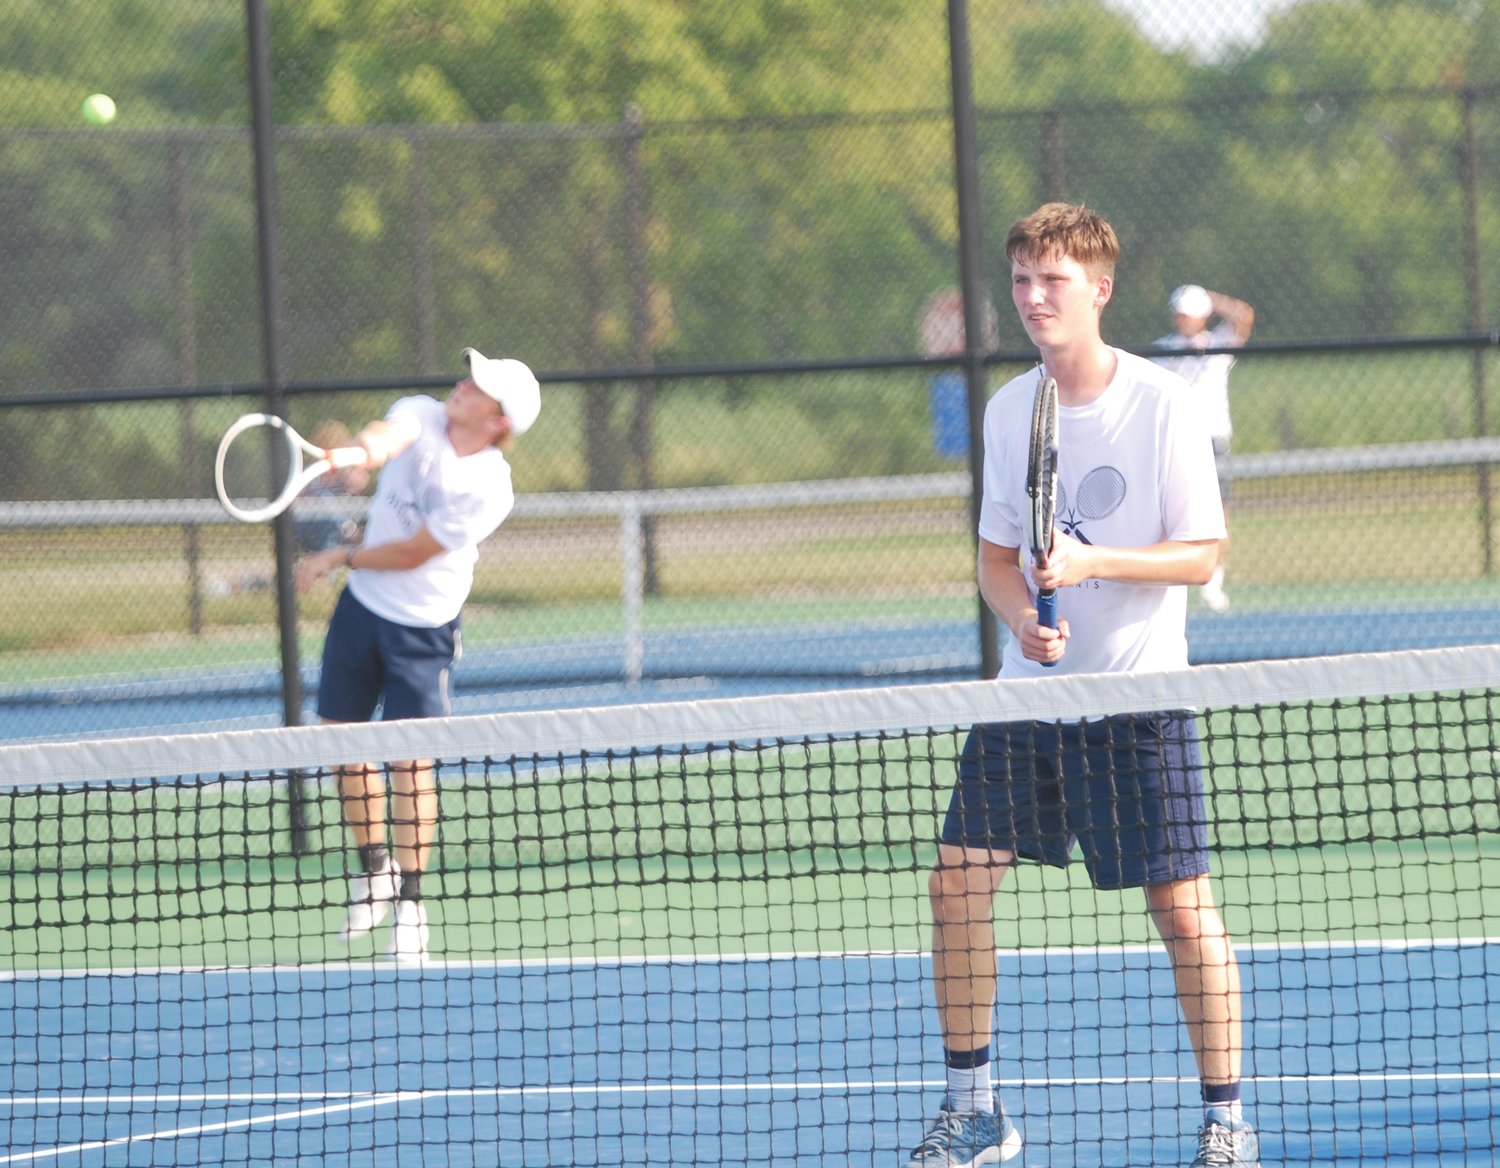 The duo of Brent Myers, left, and Sawyer Keeling, right, stormed back at No. 2 doubles for Fountain Central to defeat Southmont's Chayce Howell and Harrison Haddock 6-7(4), 6-2, 7-5.